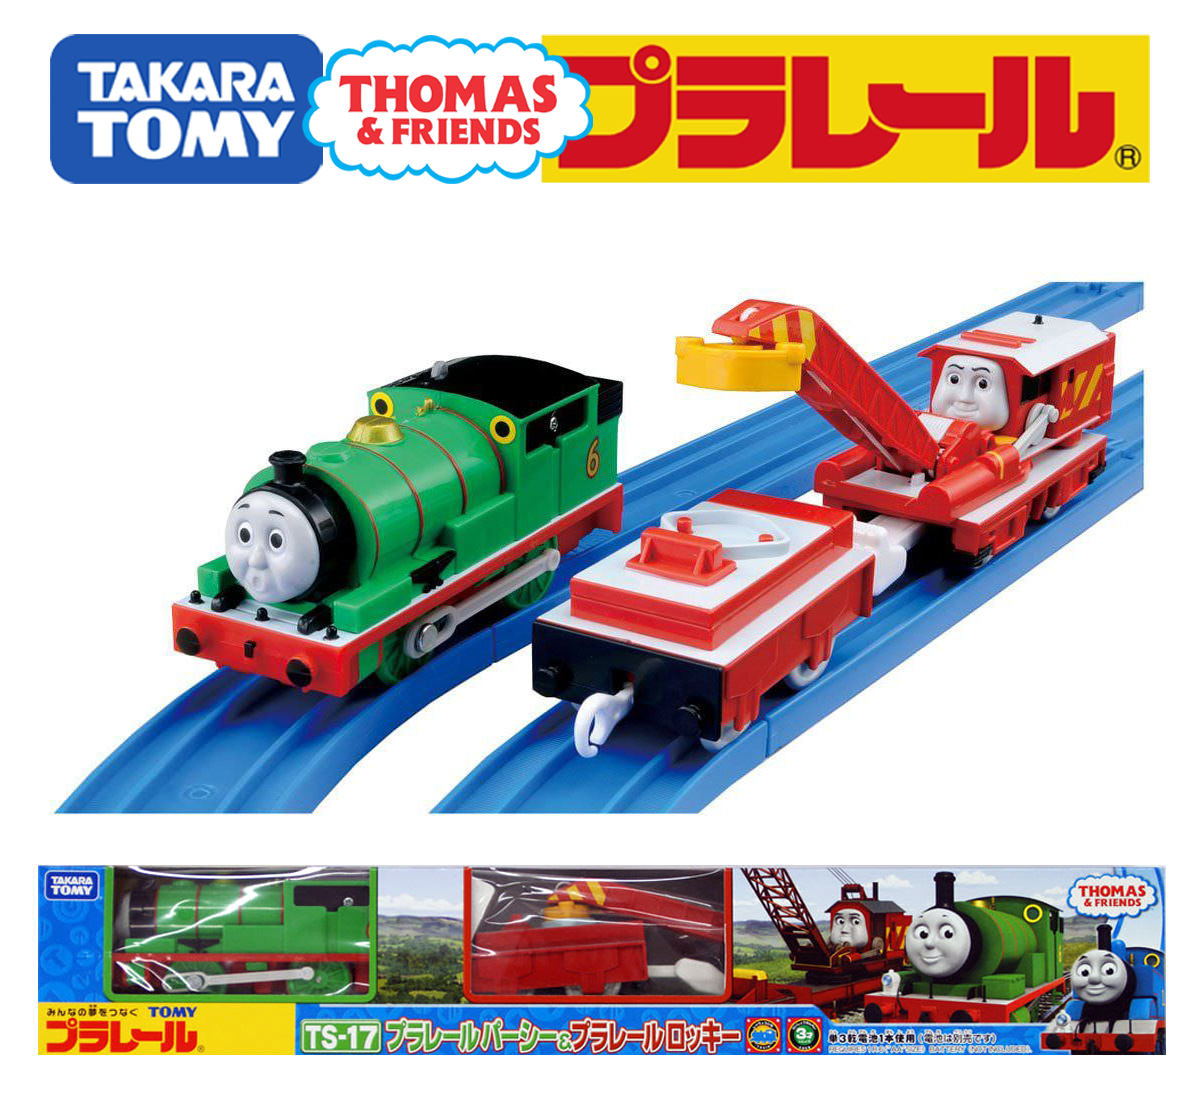 F/s Takara TOMY Thomas Ts-17 Percy & Rocky Train IMPORT From JP 0715 S for sale online 